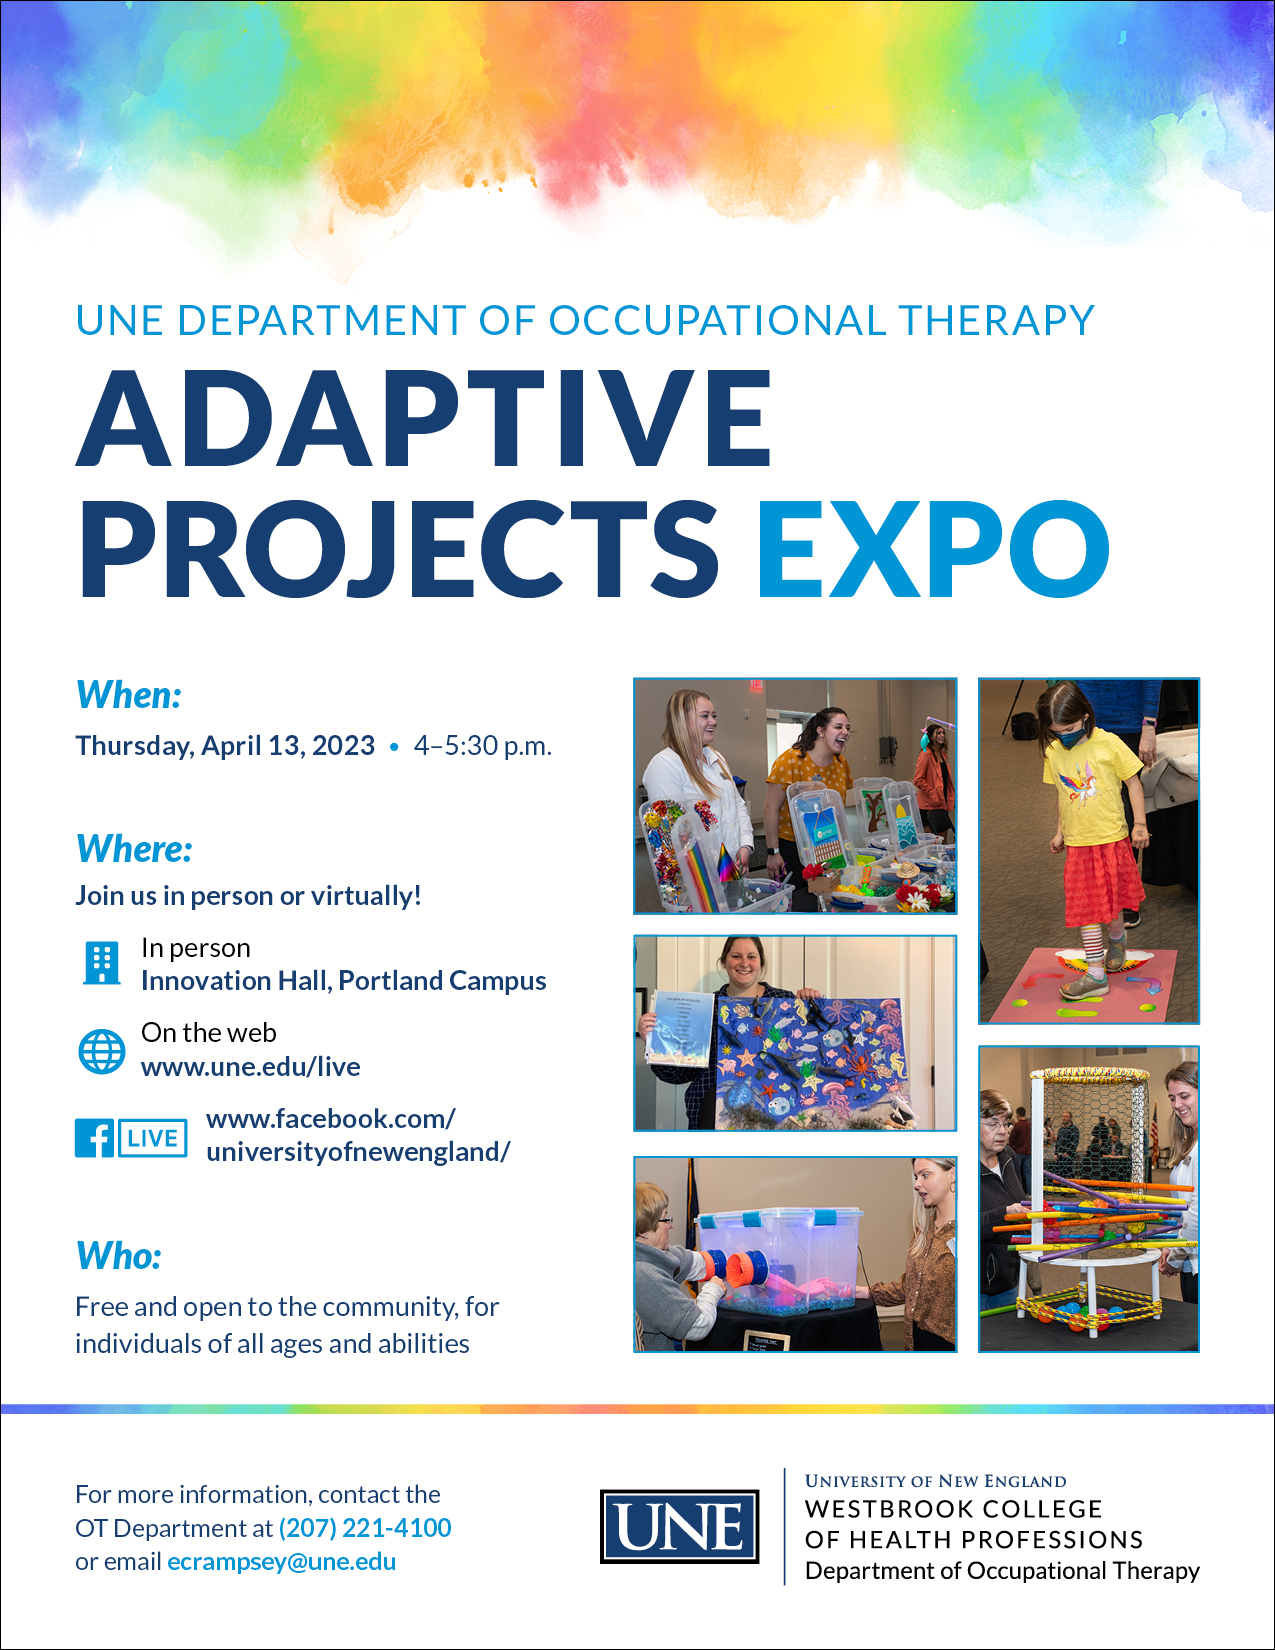 Poster for the 2023 Adaptive Projects Expo event